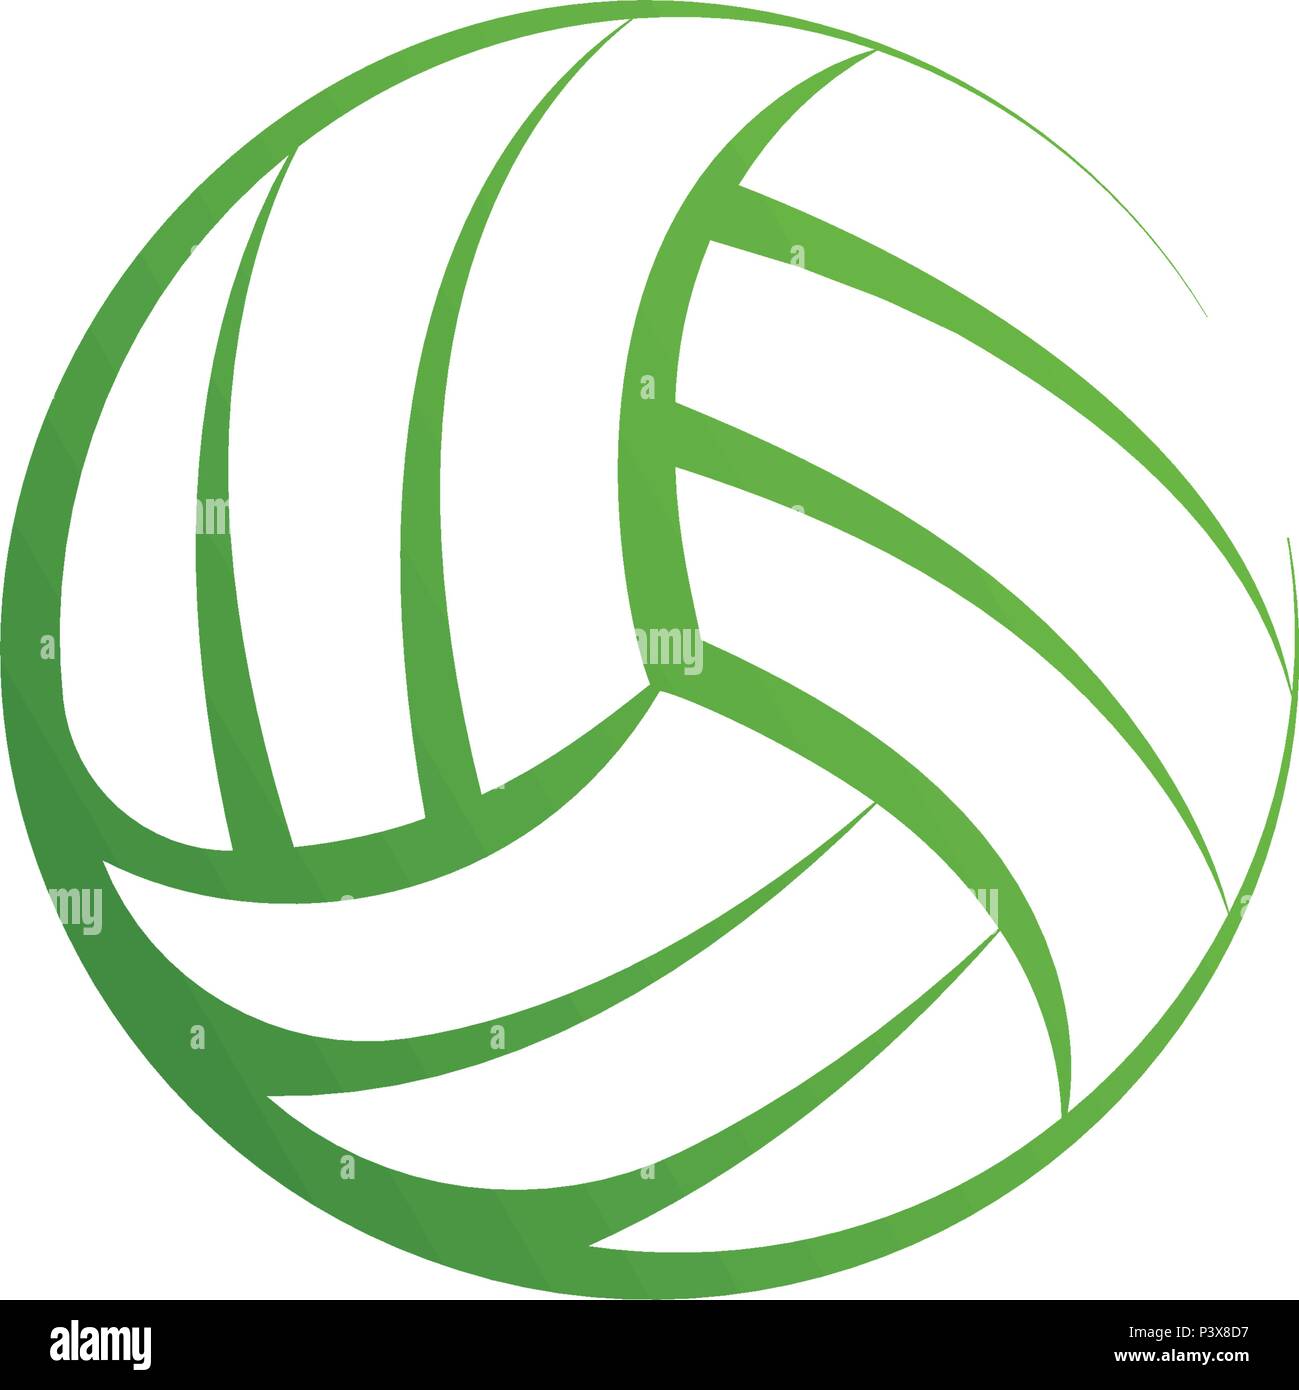 Volleyball logo element, vector volley ball icon, isolated sport sign ...